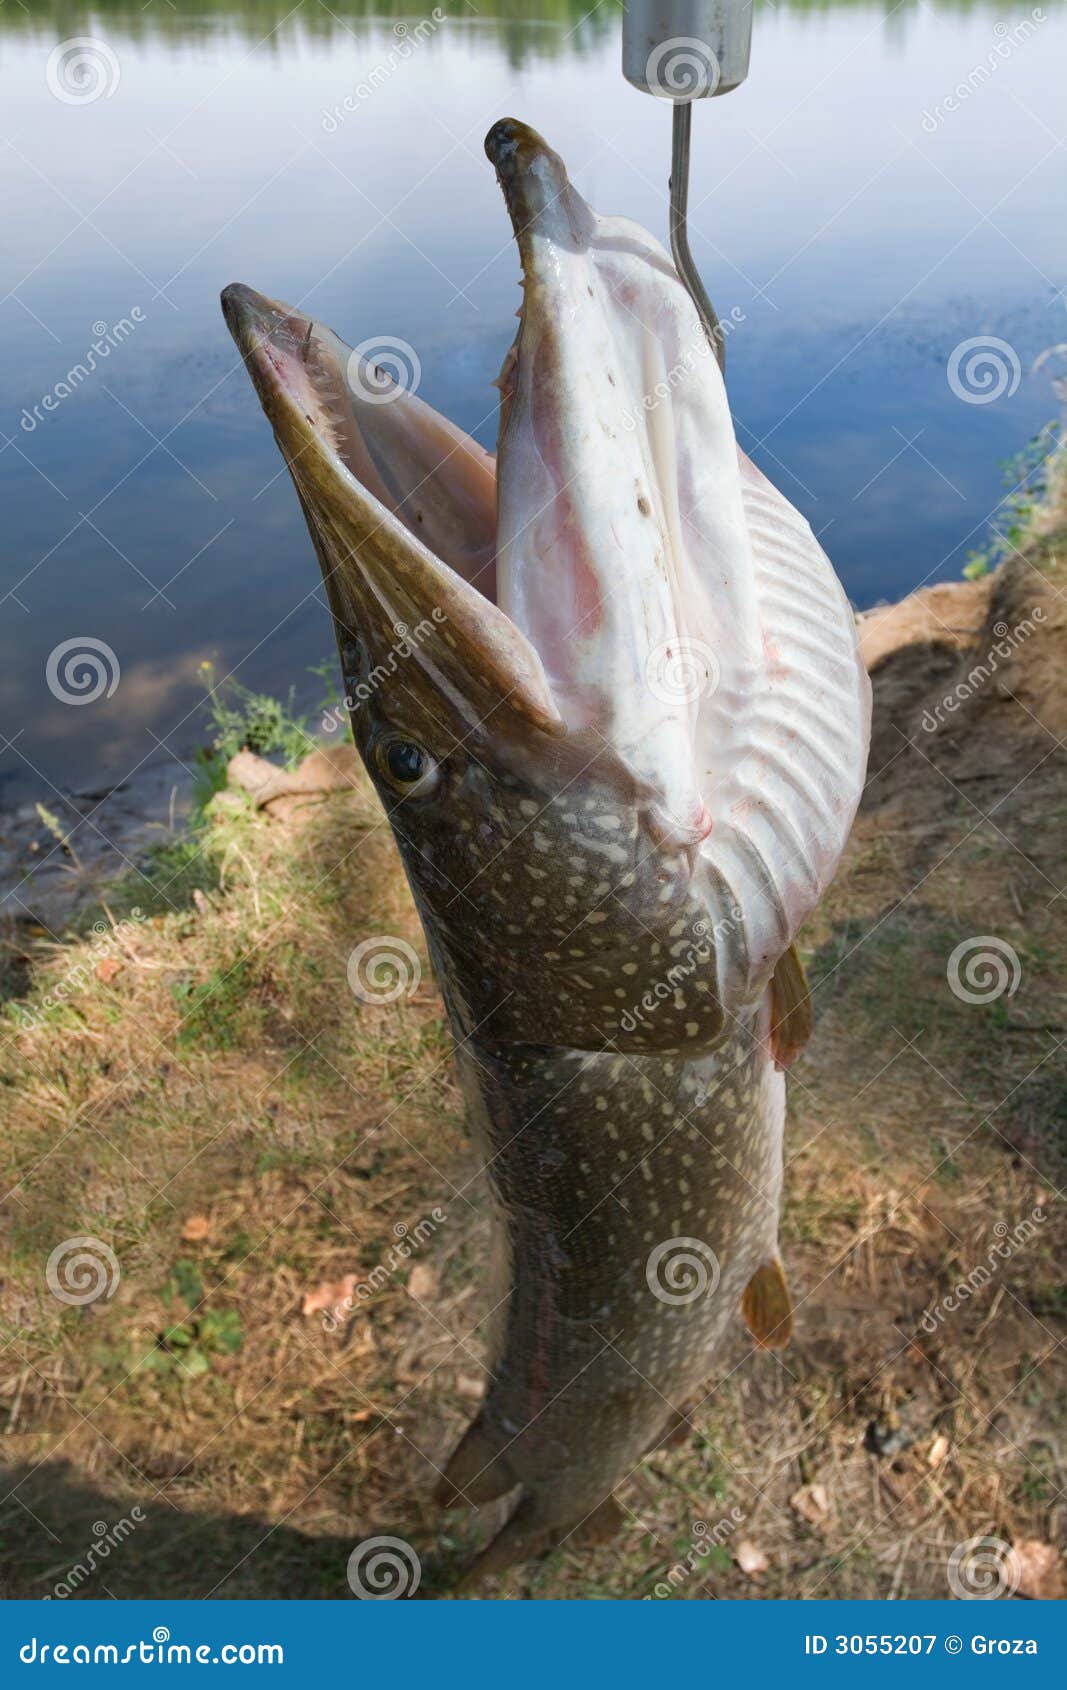 Close Up View of Big Freshwater Pike with Fishing Lure in Mouth Stock Photo  - Image of spinning, esox: 119475612